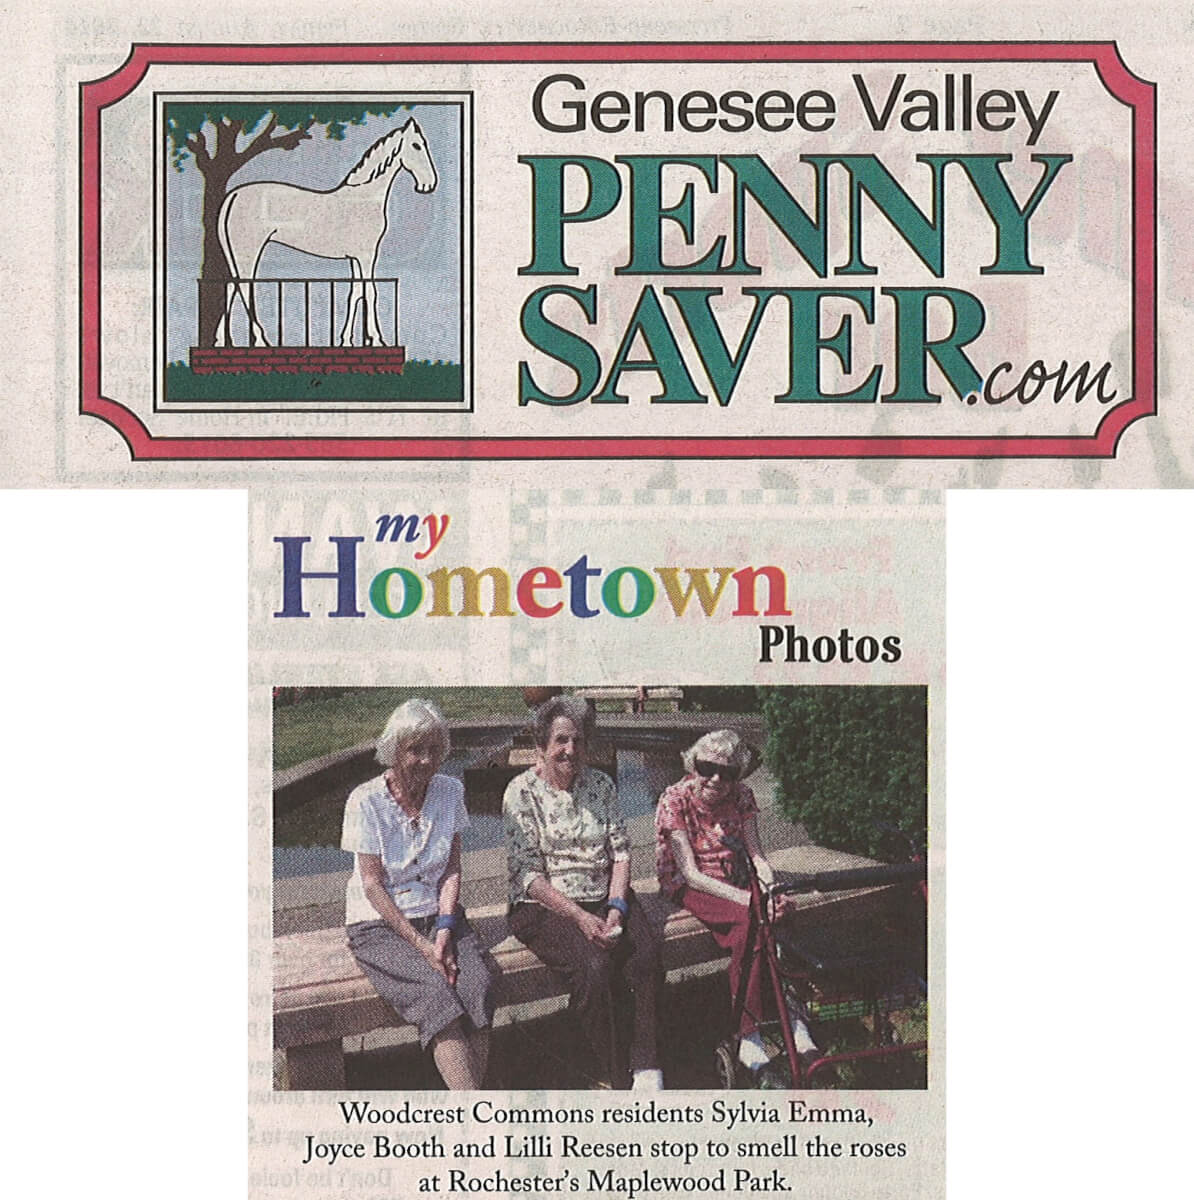 Woodcrest Commons visit Maplewood Rose Garden Photo in the Genesee Valley Penny Saver August 22, 2014